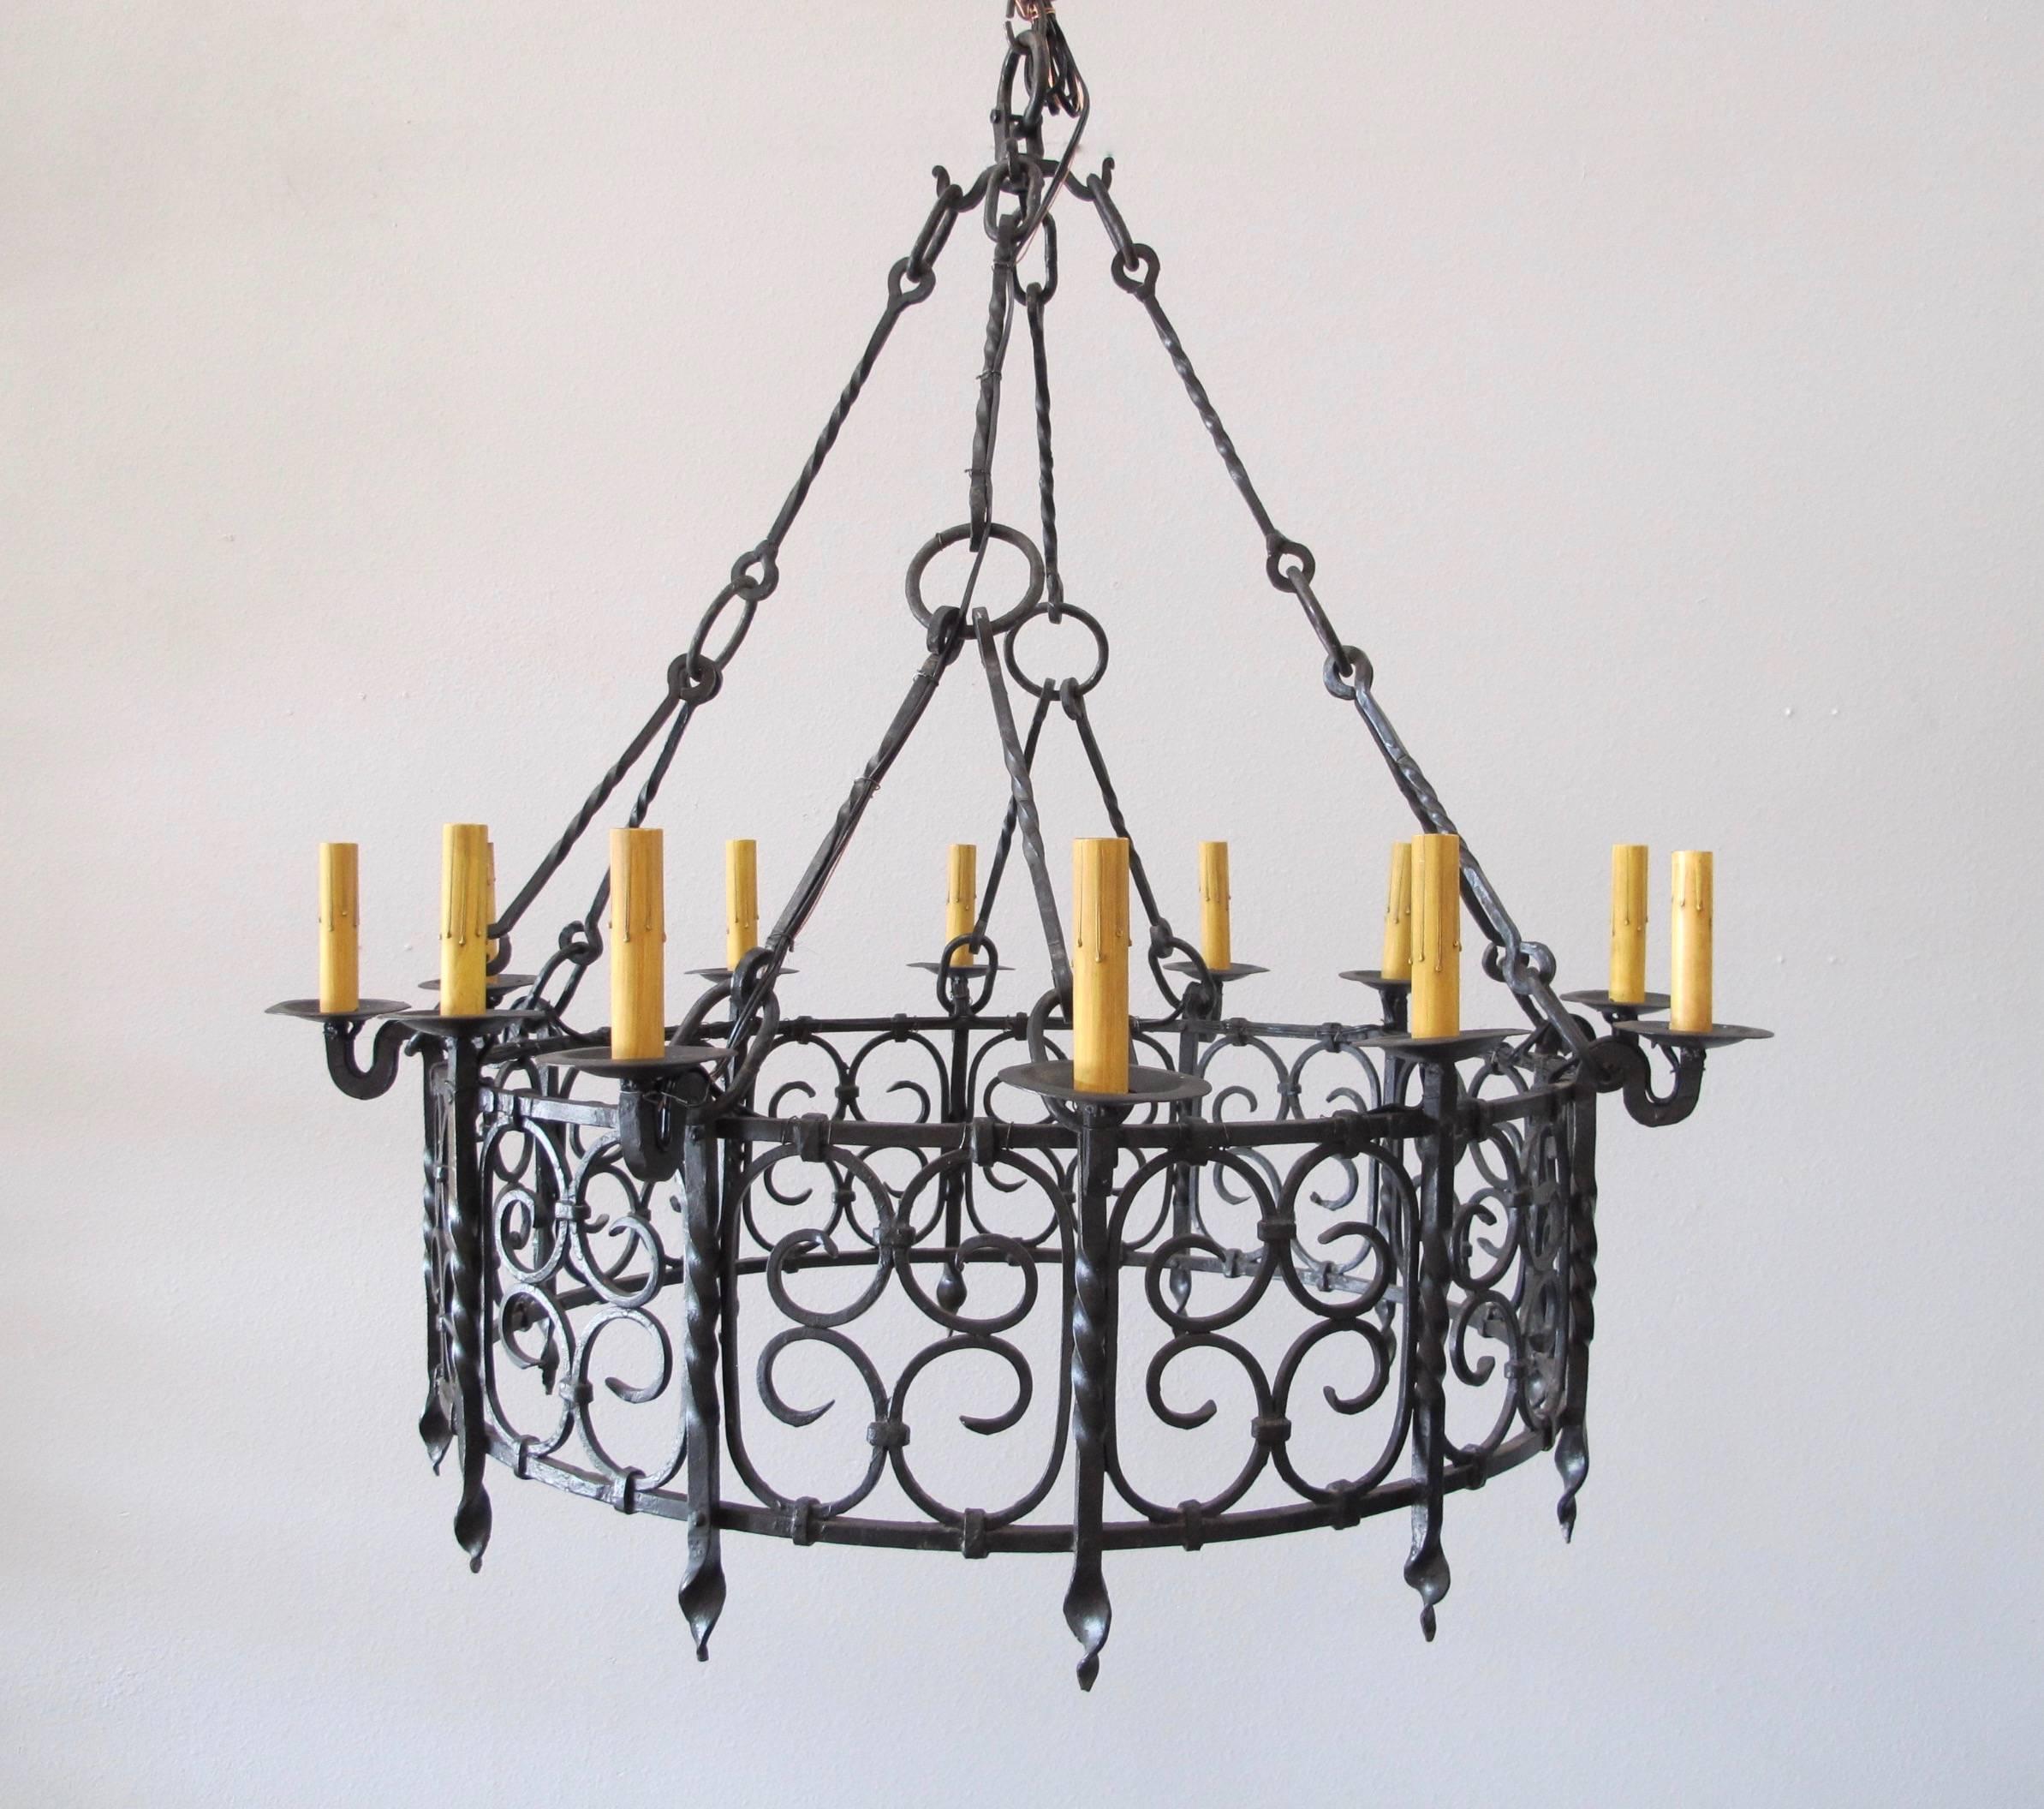 Gorgeous wrought iron chandelier in excellent condition. All wiring has been replaced and is UL approved with chain and canopy. Courtesy to the trade. Marked down 20% off original price. 